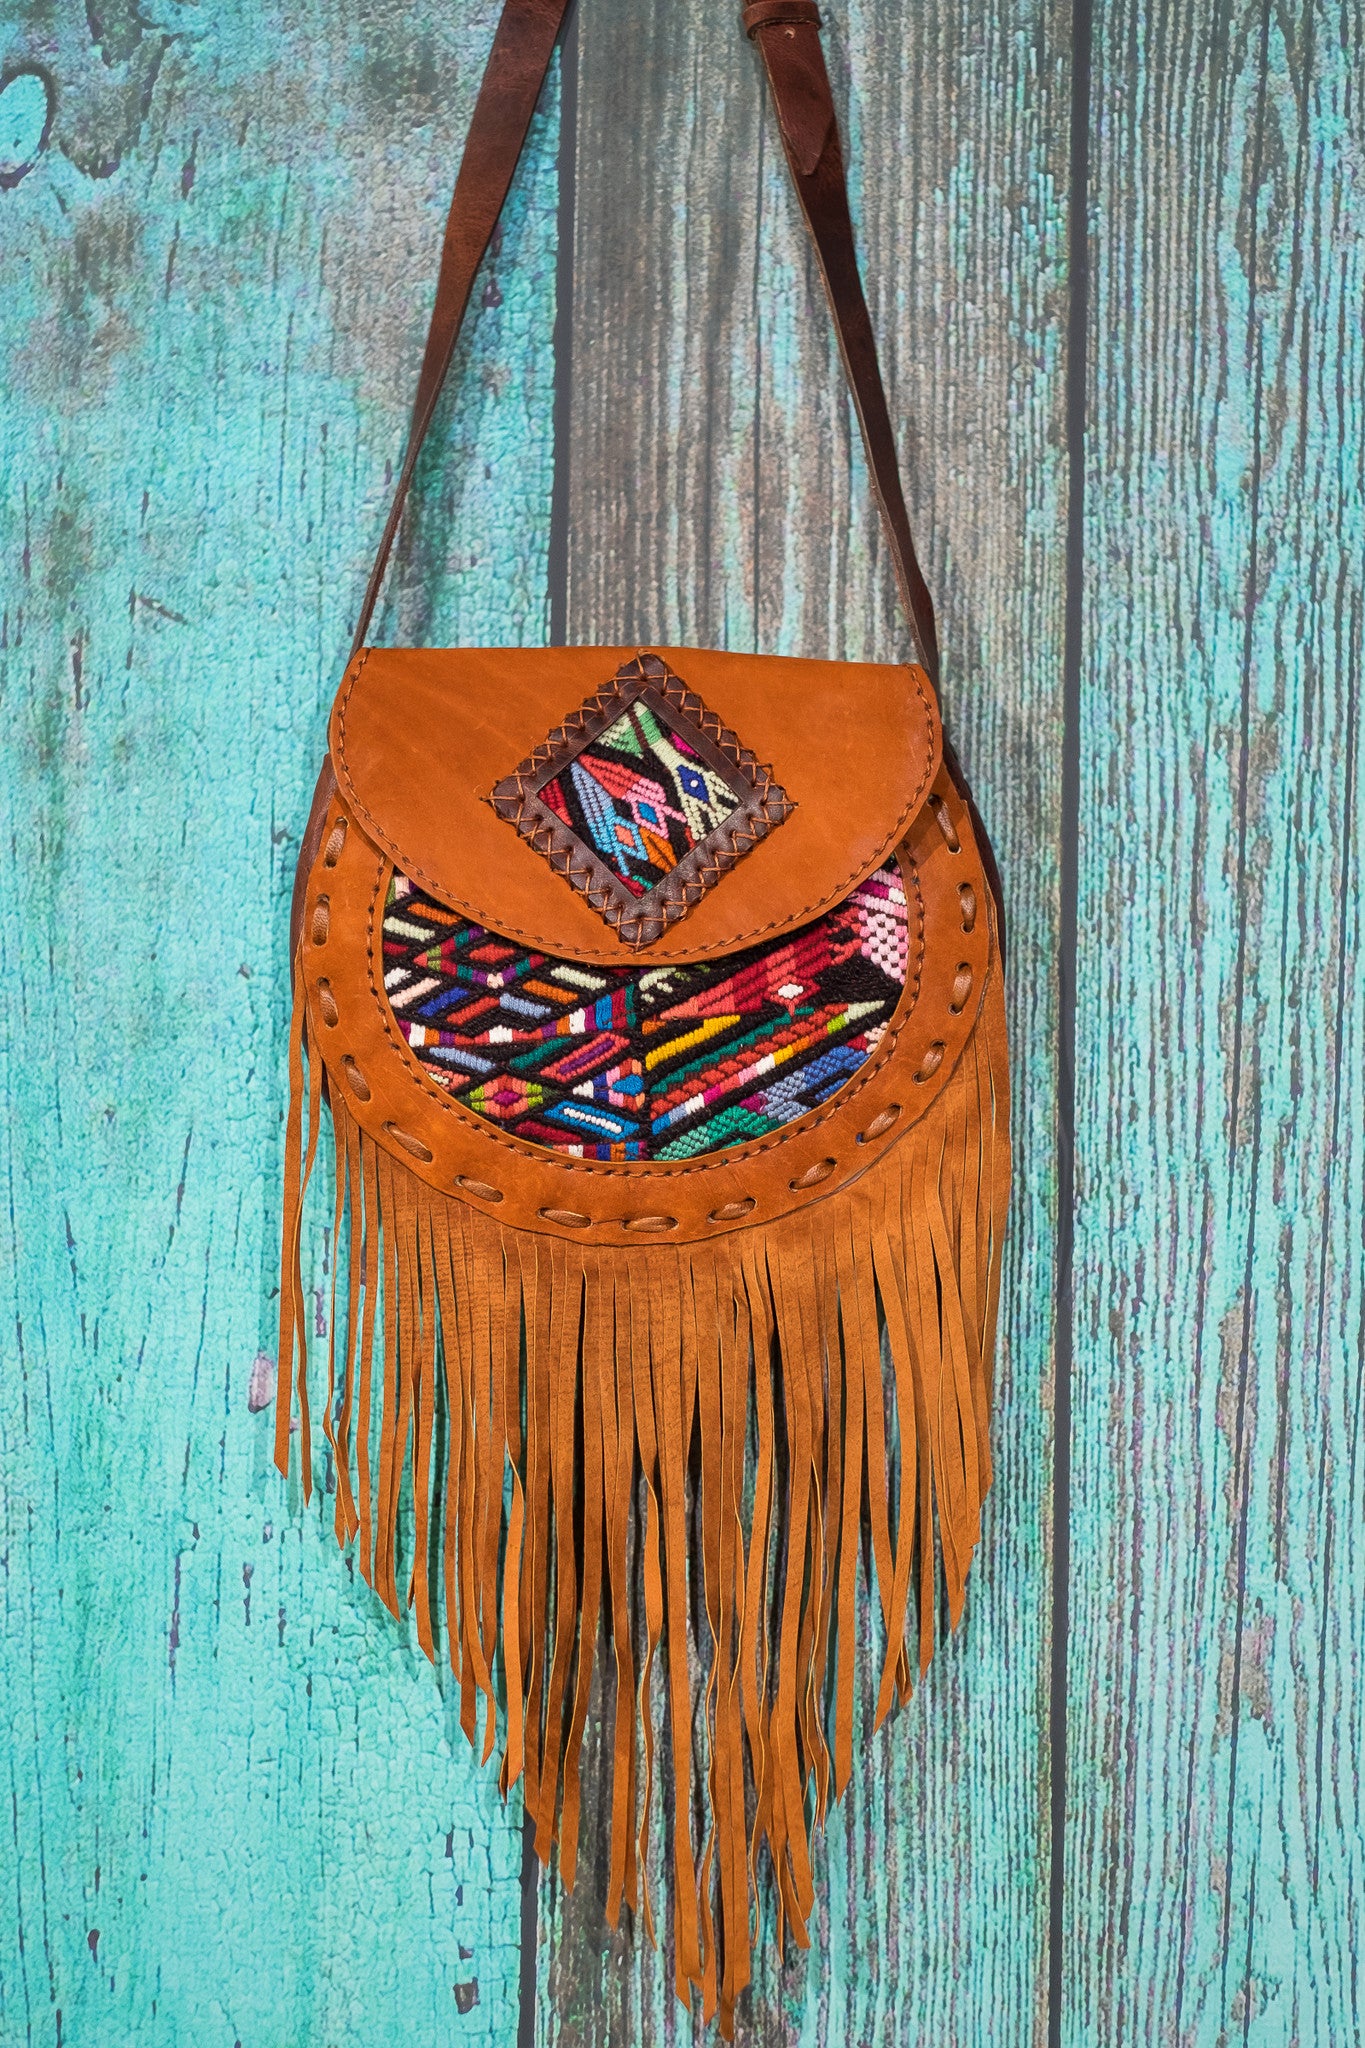 Luna camel - Boho luxe suede fringe shawl and leather jeackets